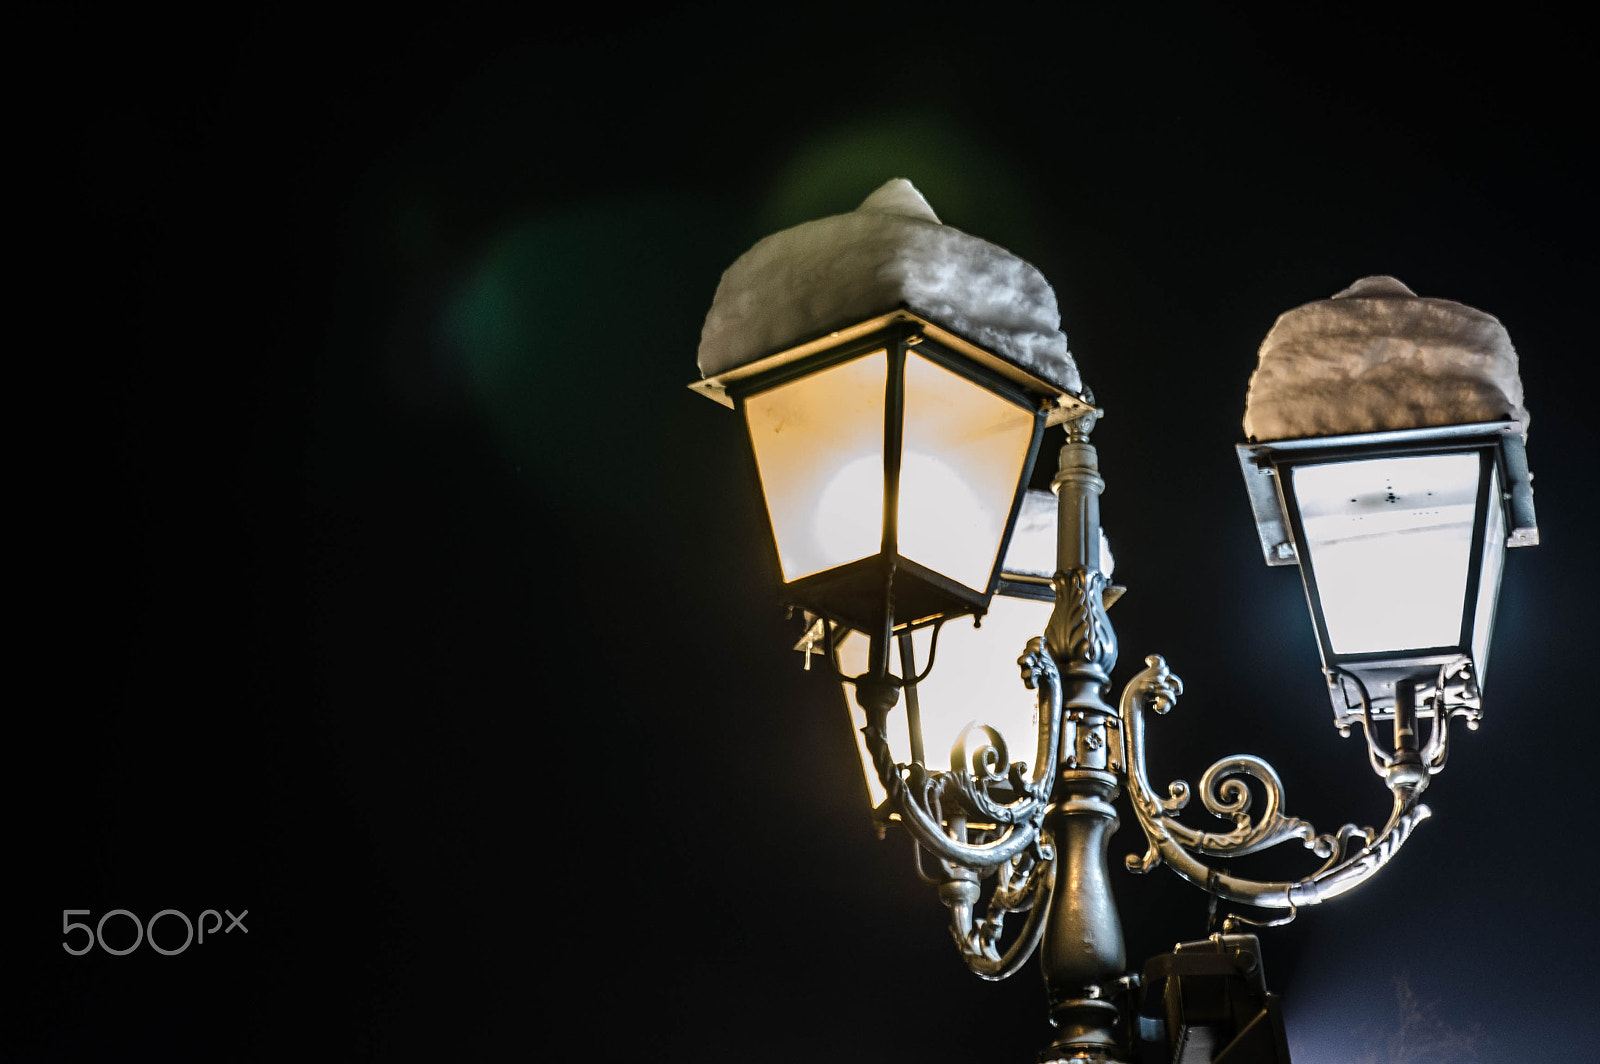 Nikon D5100 sample photo. Street lamps in the winter photography